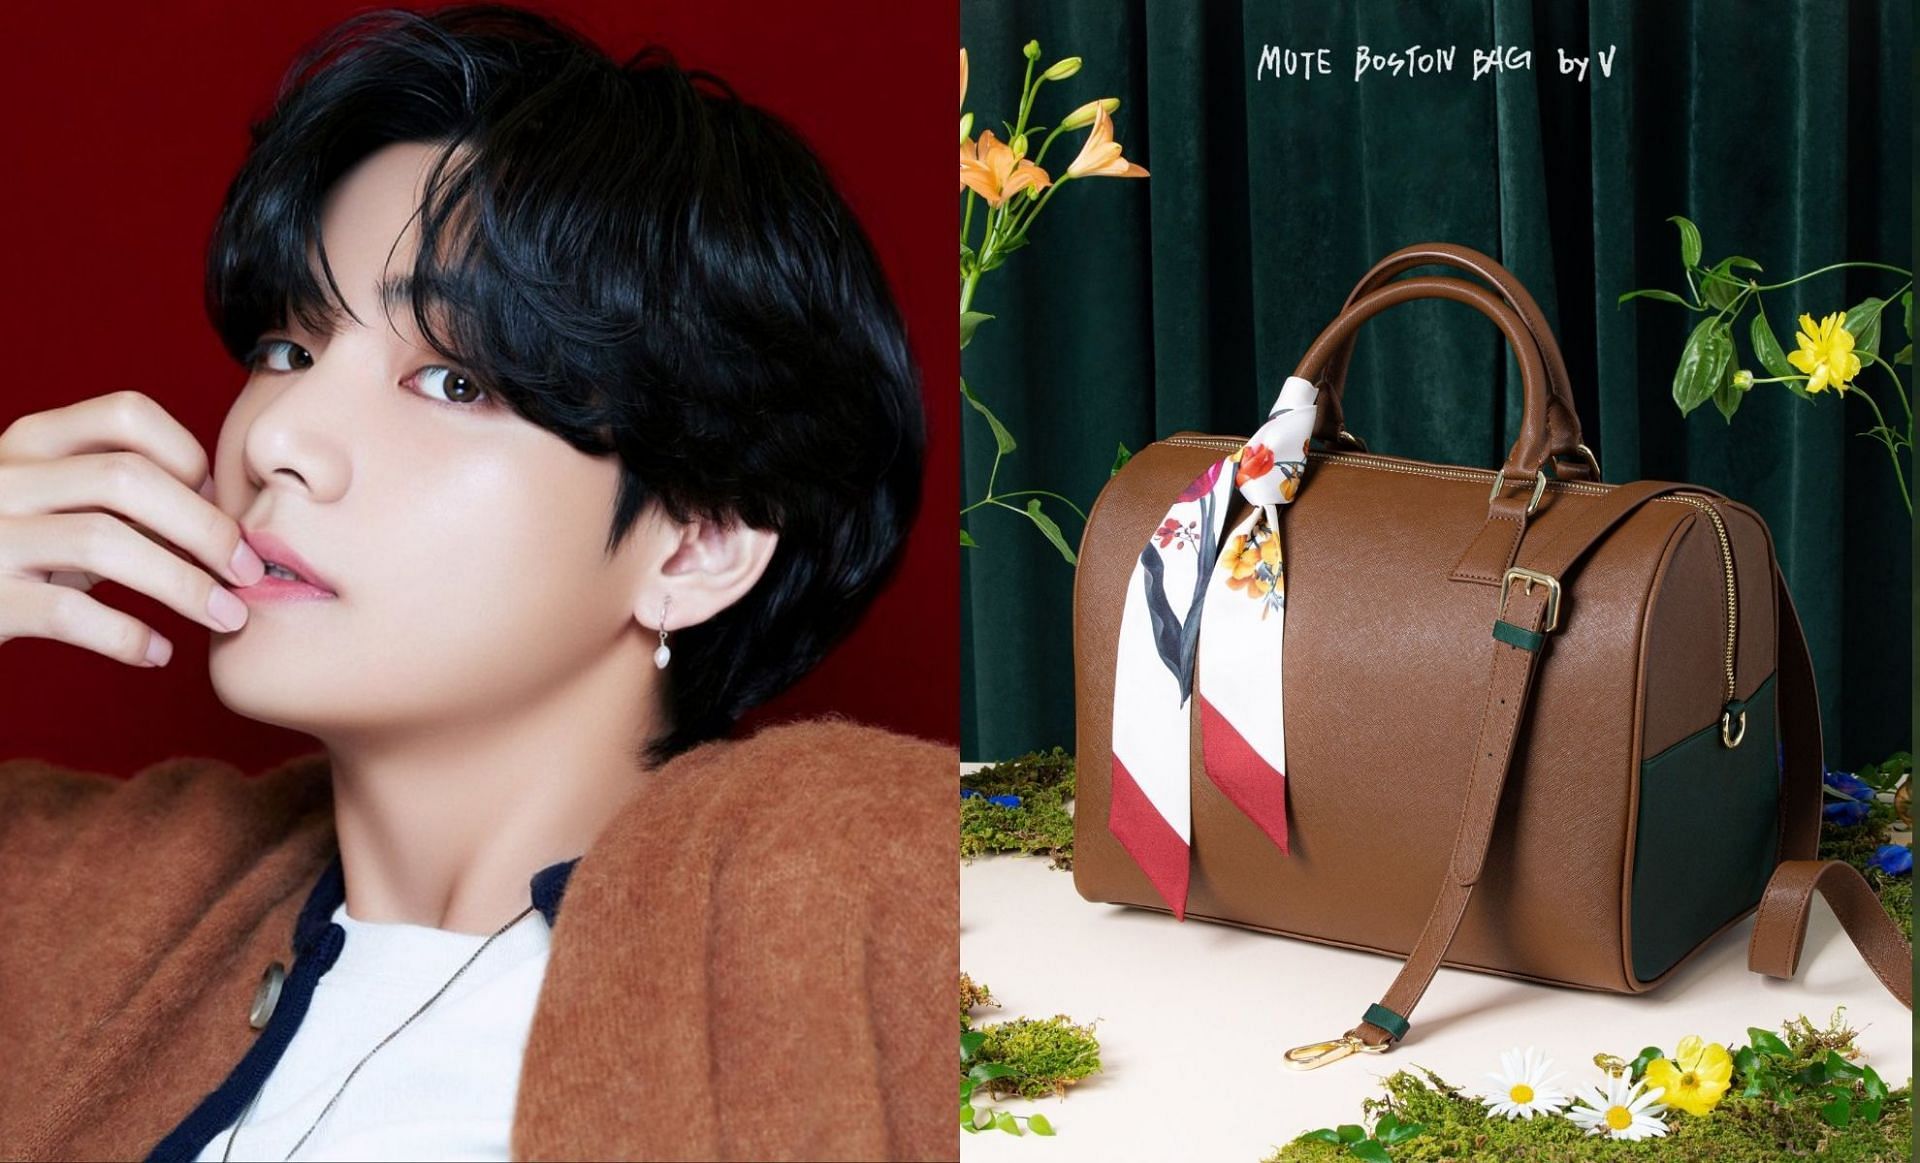 BTS&#039; V &#039;BE&#039; concept photo and Artist-Made collection&#039;s Mute Boston Bag (Image via @BIGHIT_MUSIC &amp; @weverseshop/Twitter)